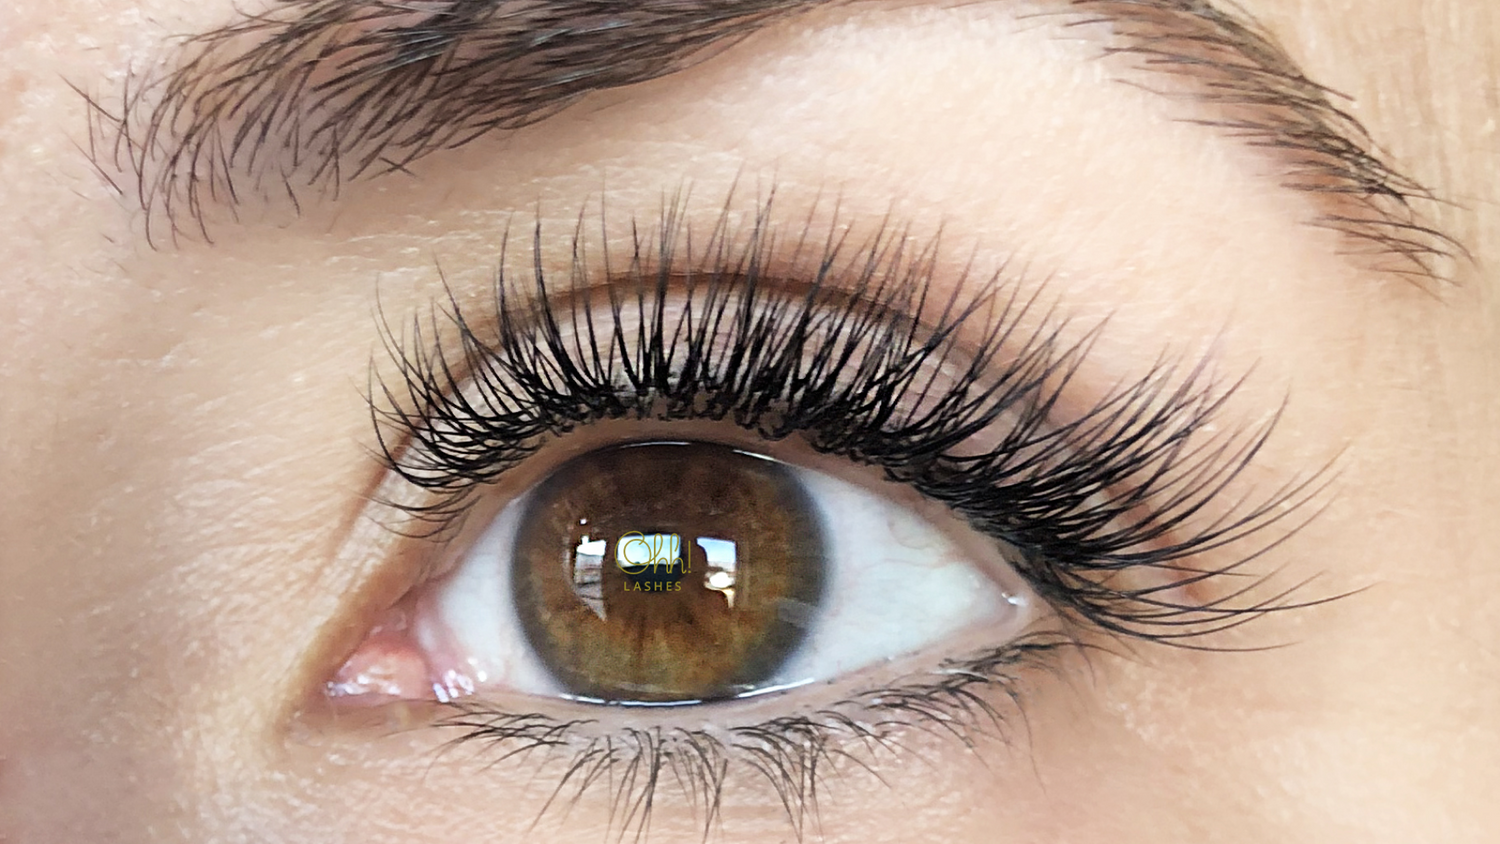 How to Remove Eyelash Extensions Safely with Ohh Lashes.